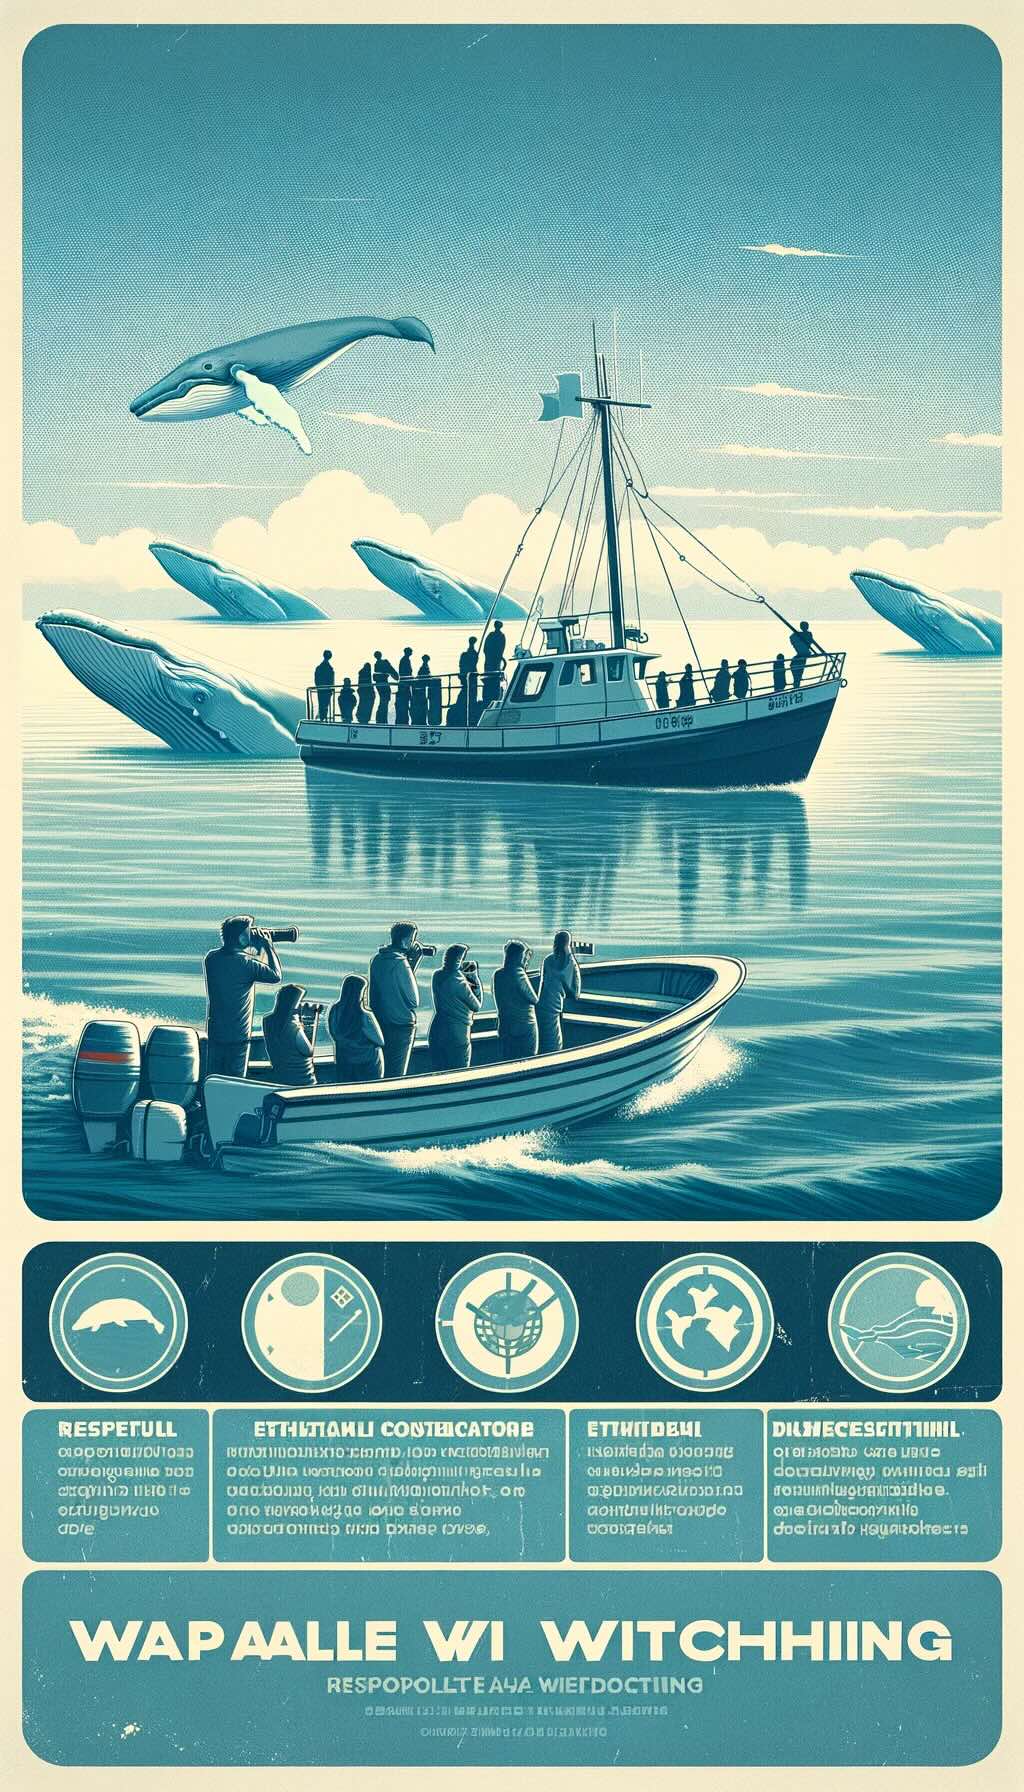 Responsible and ethical whale watching practices shows tourists on a whale watching boat, maintaining a respectful distance from the whales, with imagery reflecting a commitment to conservation.